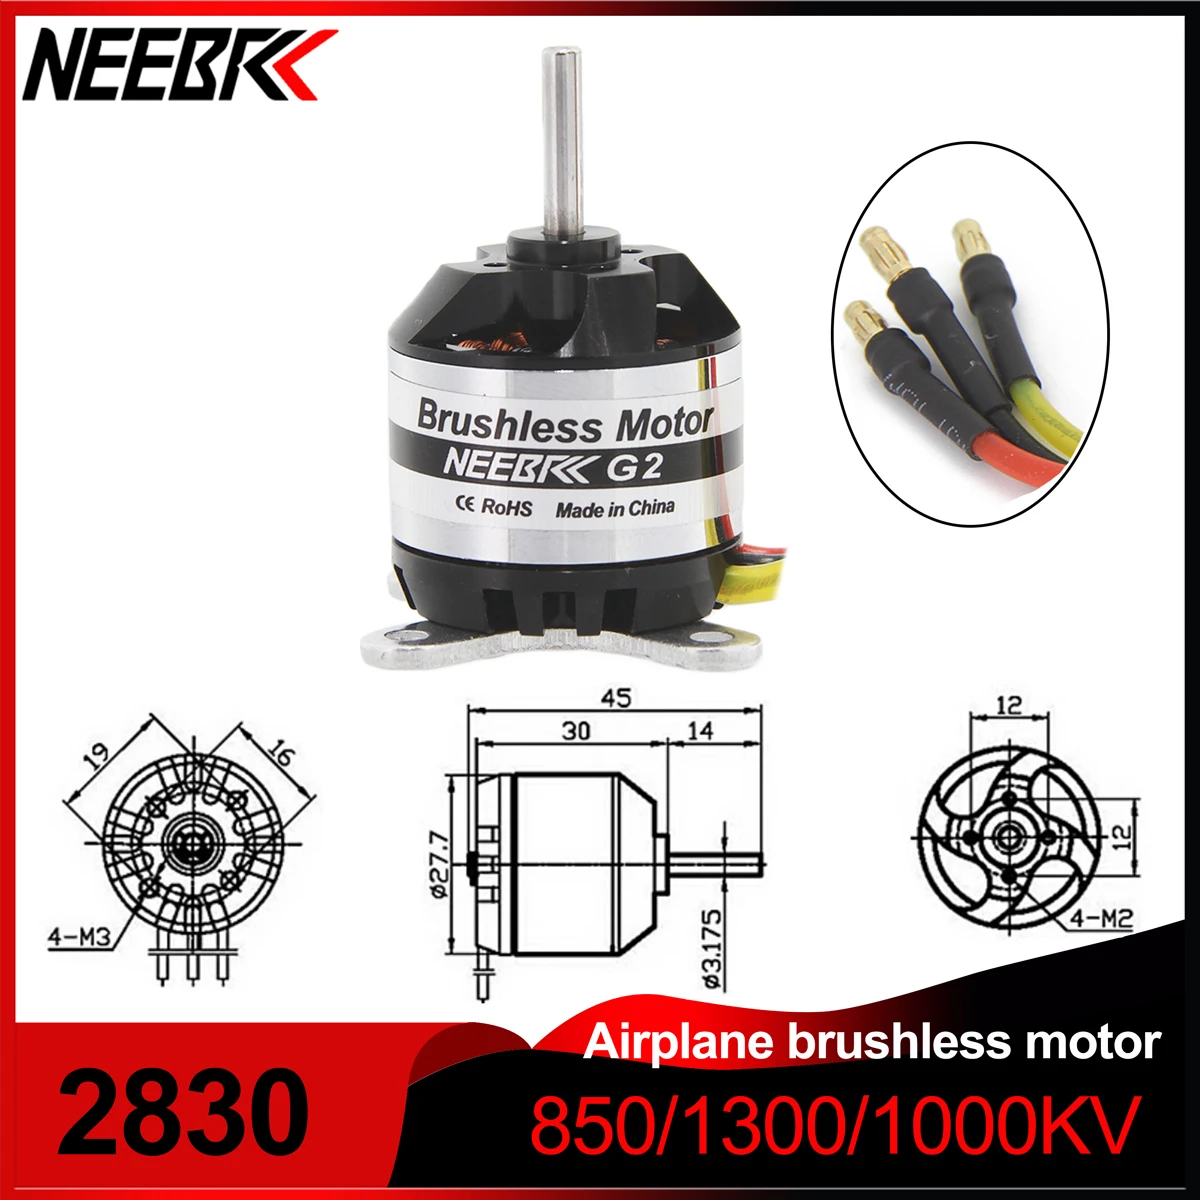 

NEEBRC 2830 850KV 1000KV 1300KV Brushless Motor Engine EDF for RC Airplane Fixed-wing Multicopter FPV Racing Drone Helicopter